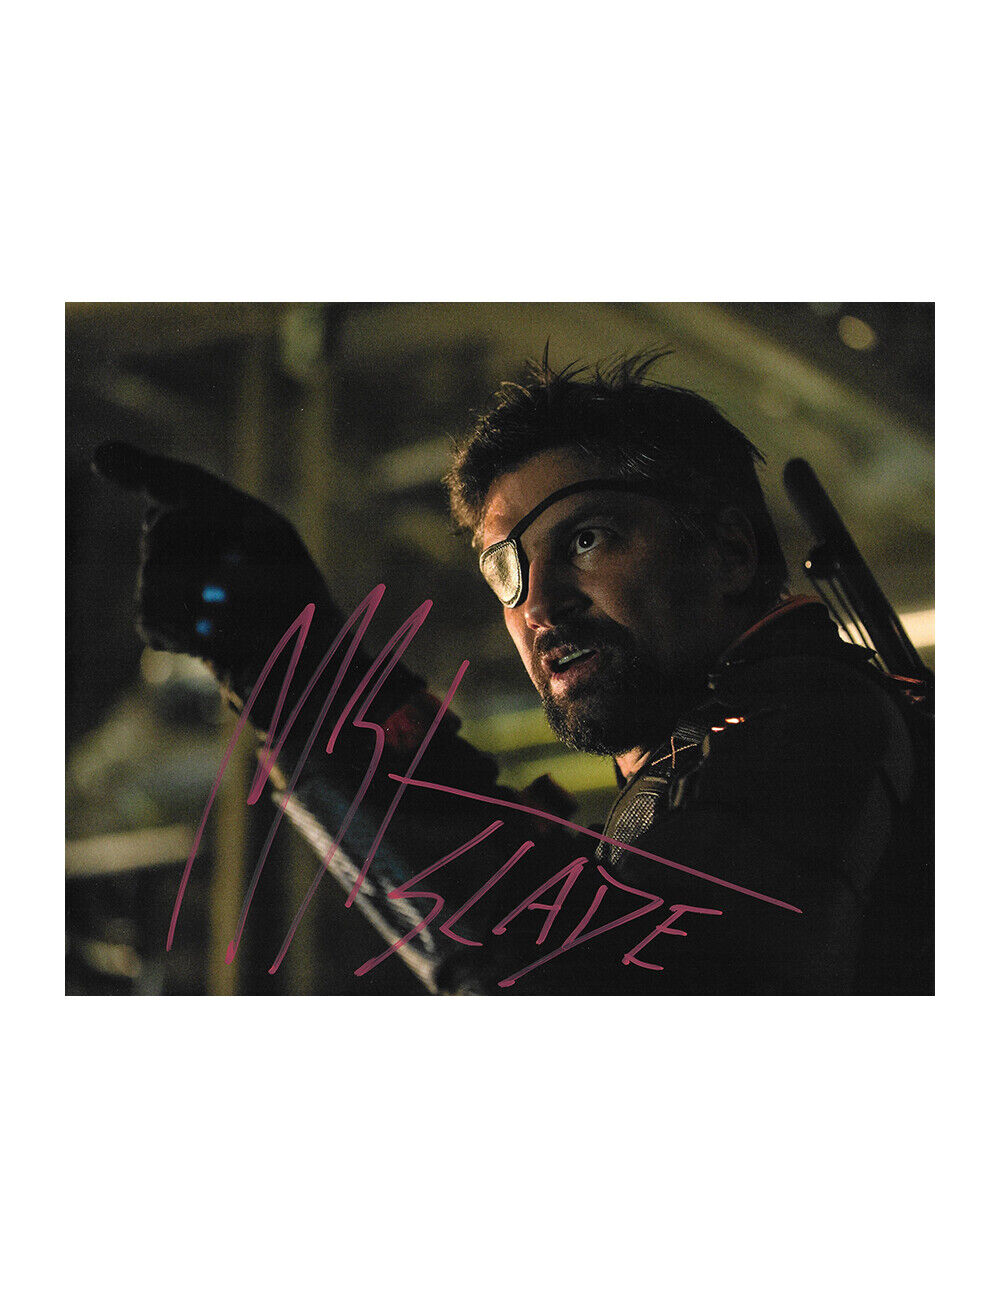 10x8 Arrow Slade Wilson Print Signed By Manu Bennett 100% Authentic With COA